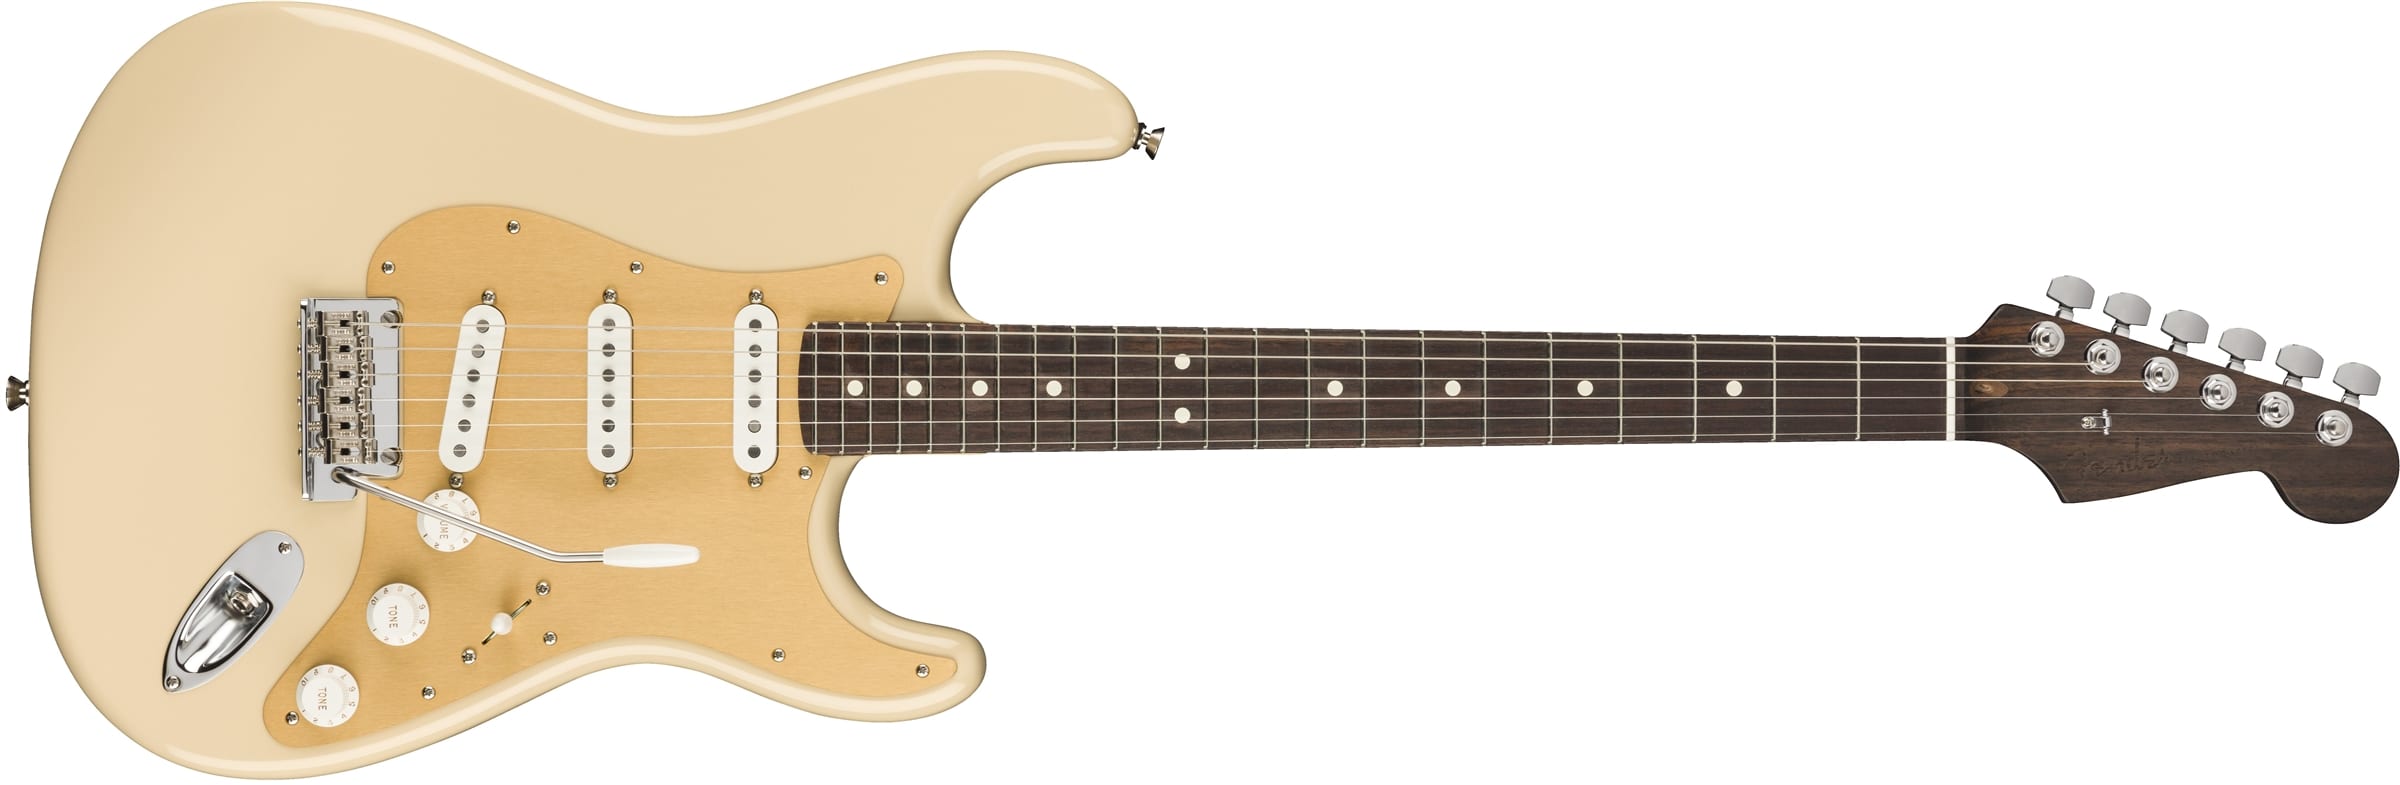 Fender 2020 Limited Edition American Professional Stratocaster in Desert Sand 